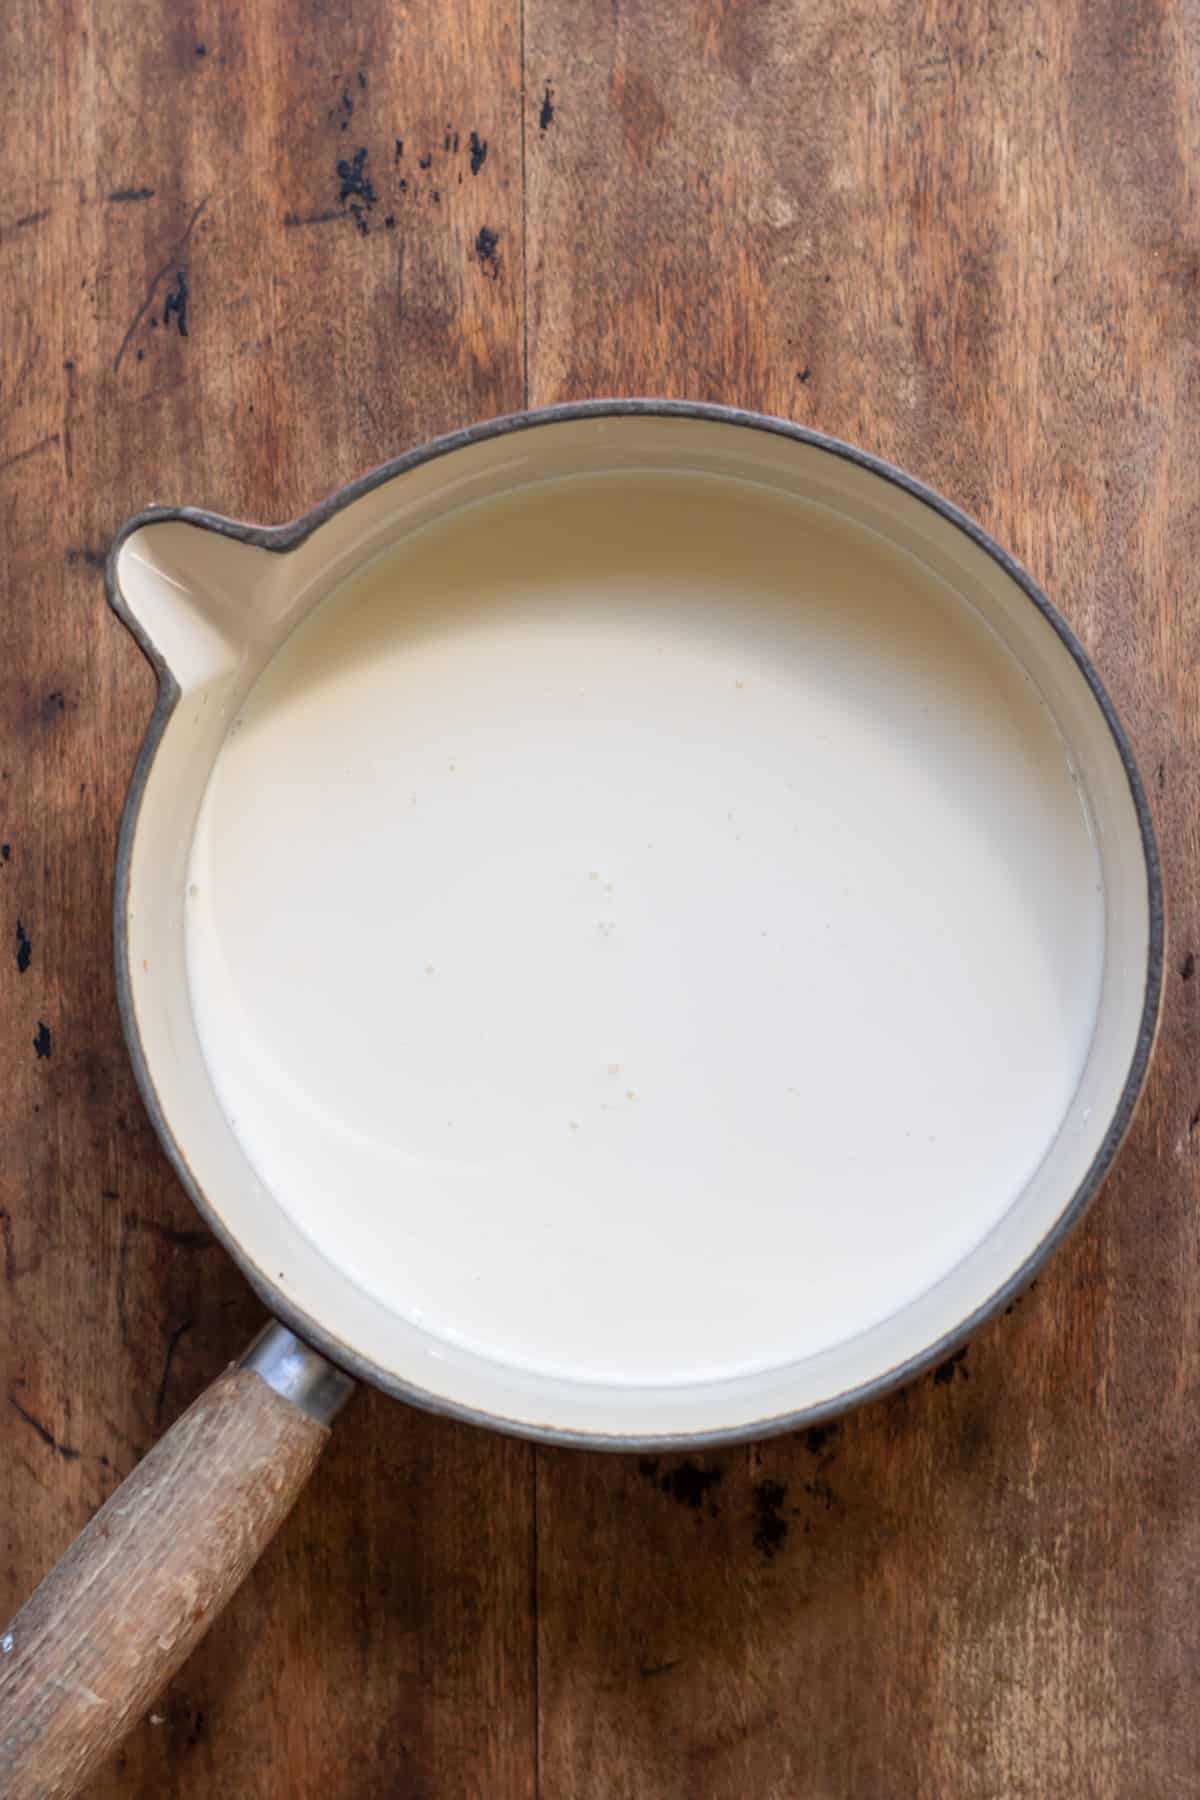 Heating cream and milk in a pot.